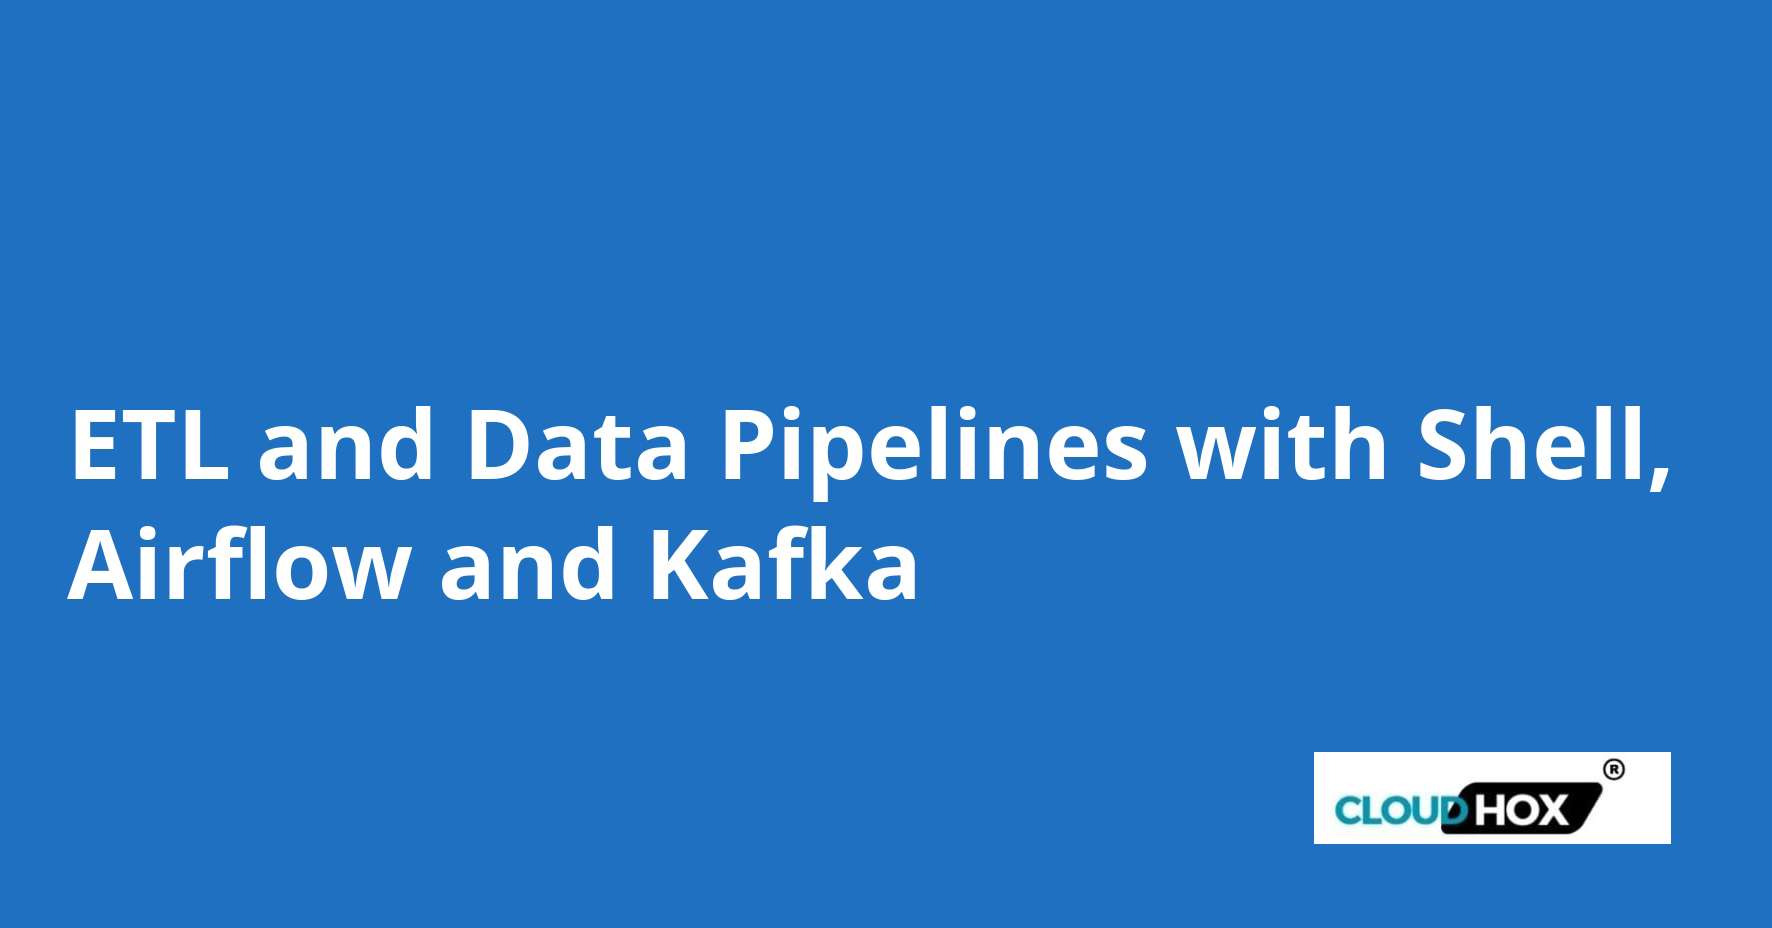 ETL and Data Pipelines with Shell, Airflow and Kafka